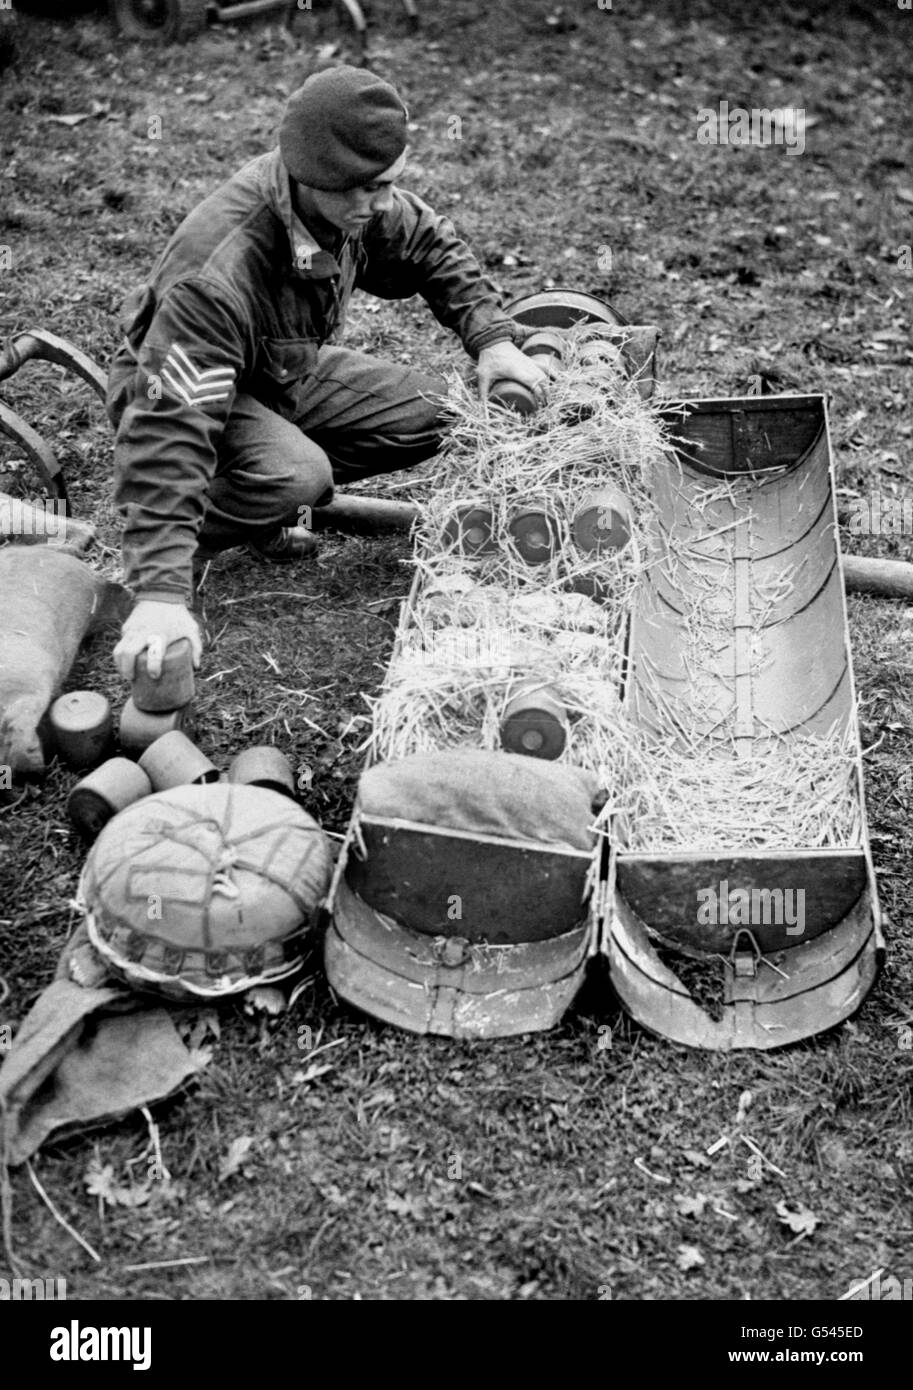 A Sergeant of the Royal Army Service Corps packs a canister which is to be dropped from an aeroplane. These men are essential to every movement the Army makes, delivering food, medical supplies, fuel, ammunition or weaponry. They are specially trained to pack panniers, fly in and drop the load by parachute. Stock Photo